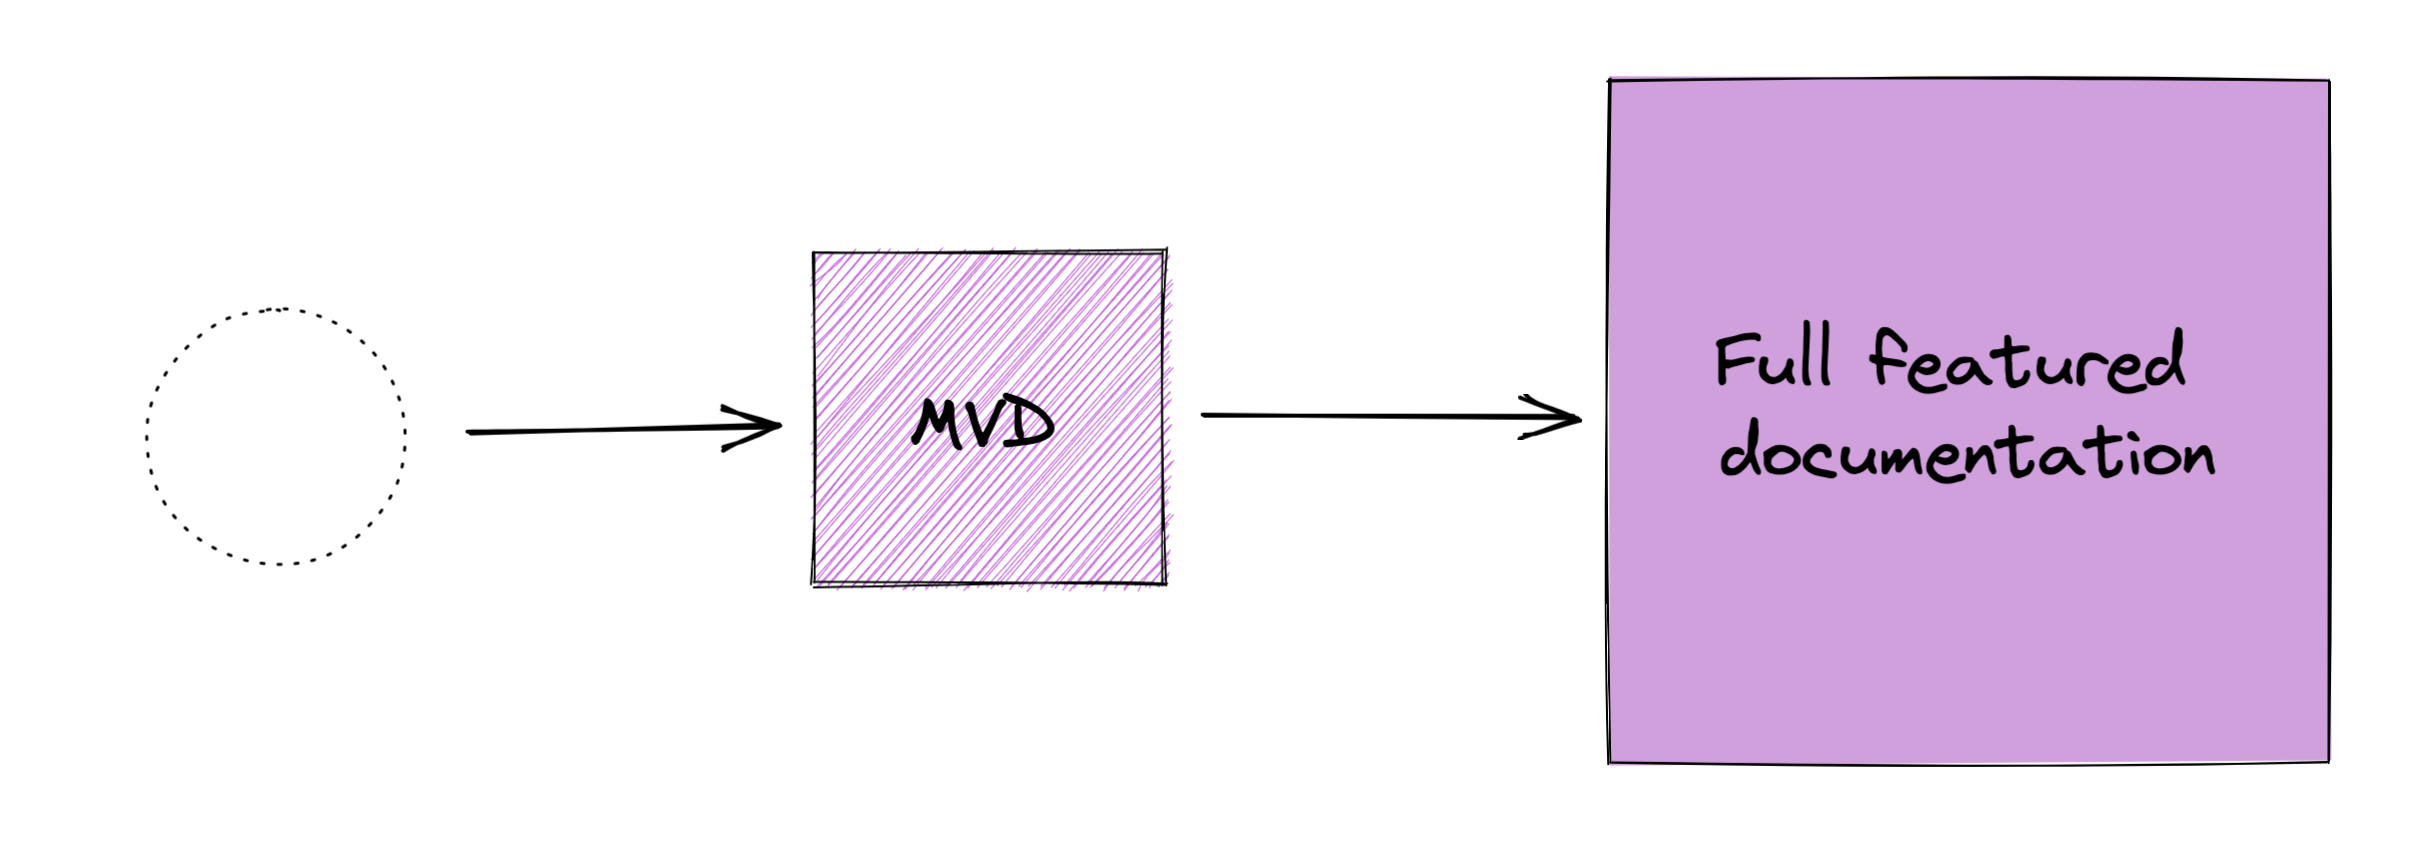 Diagram showing an empty circle with a dotted line border and an arrow pointing to a pink shaded square labeled MVD, which points to a larger pink filled in square labeled full featured documentation.